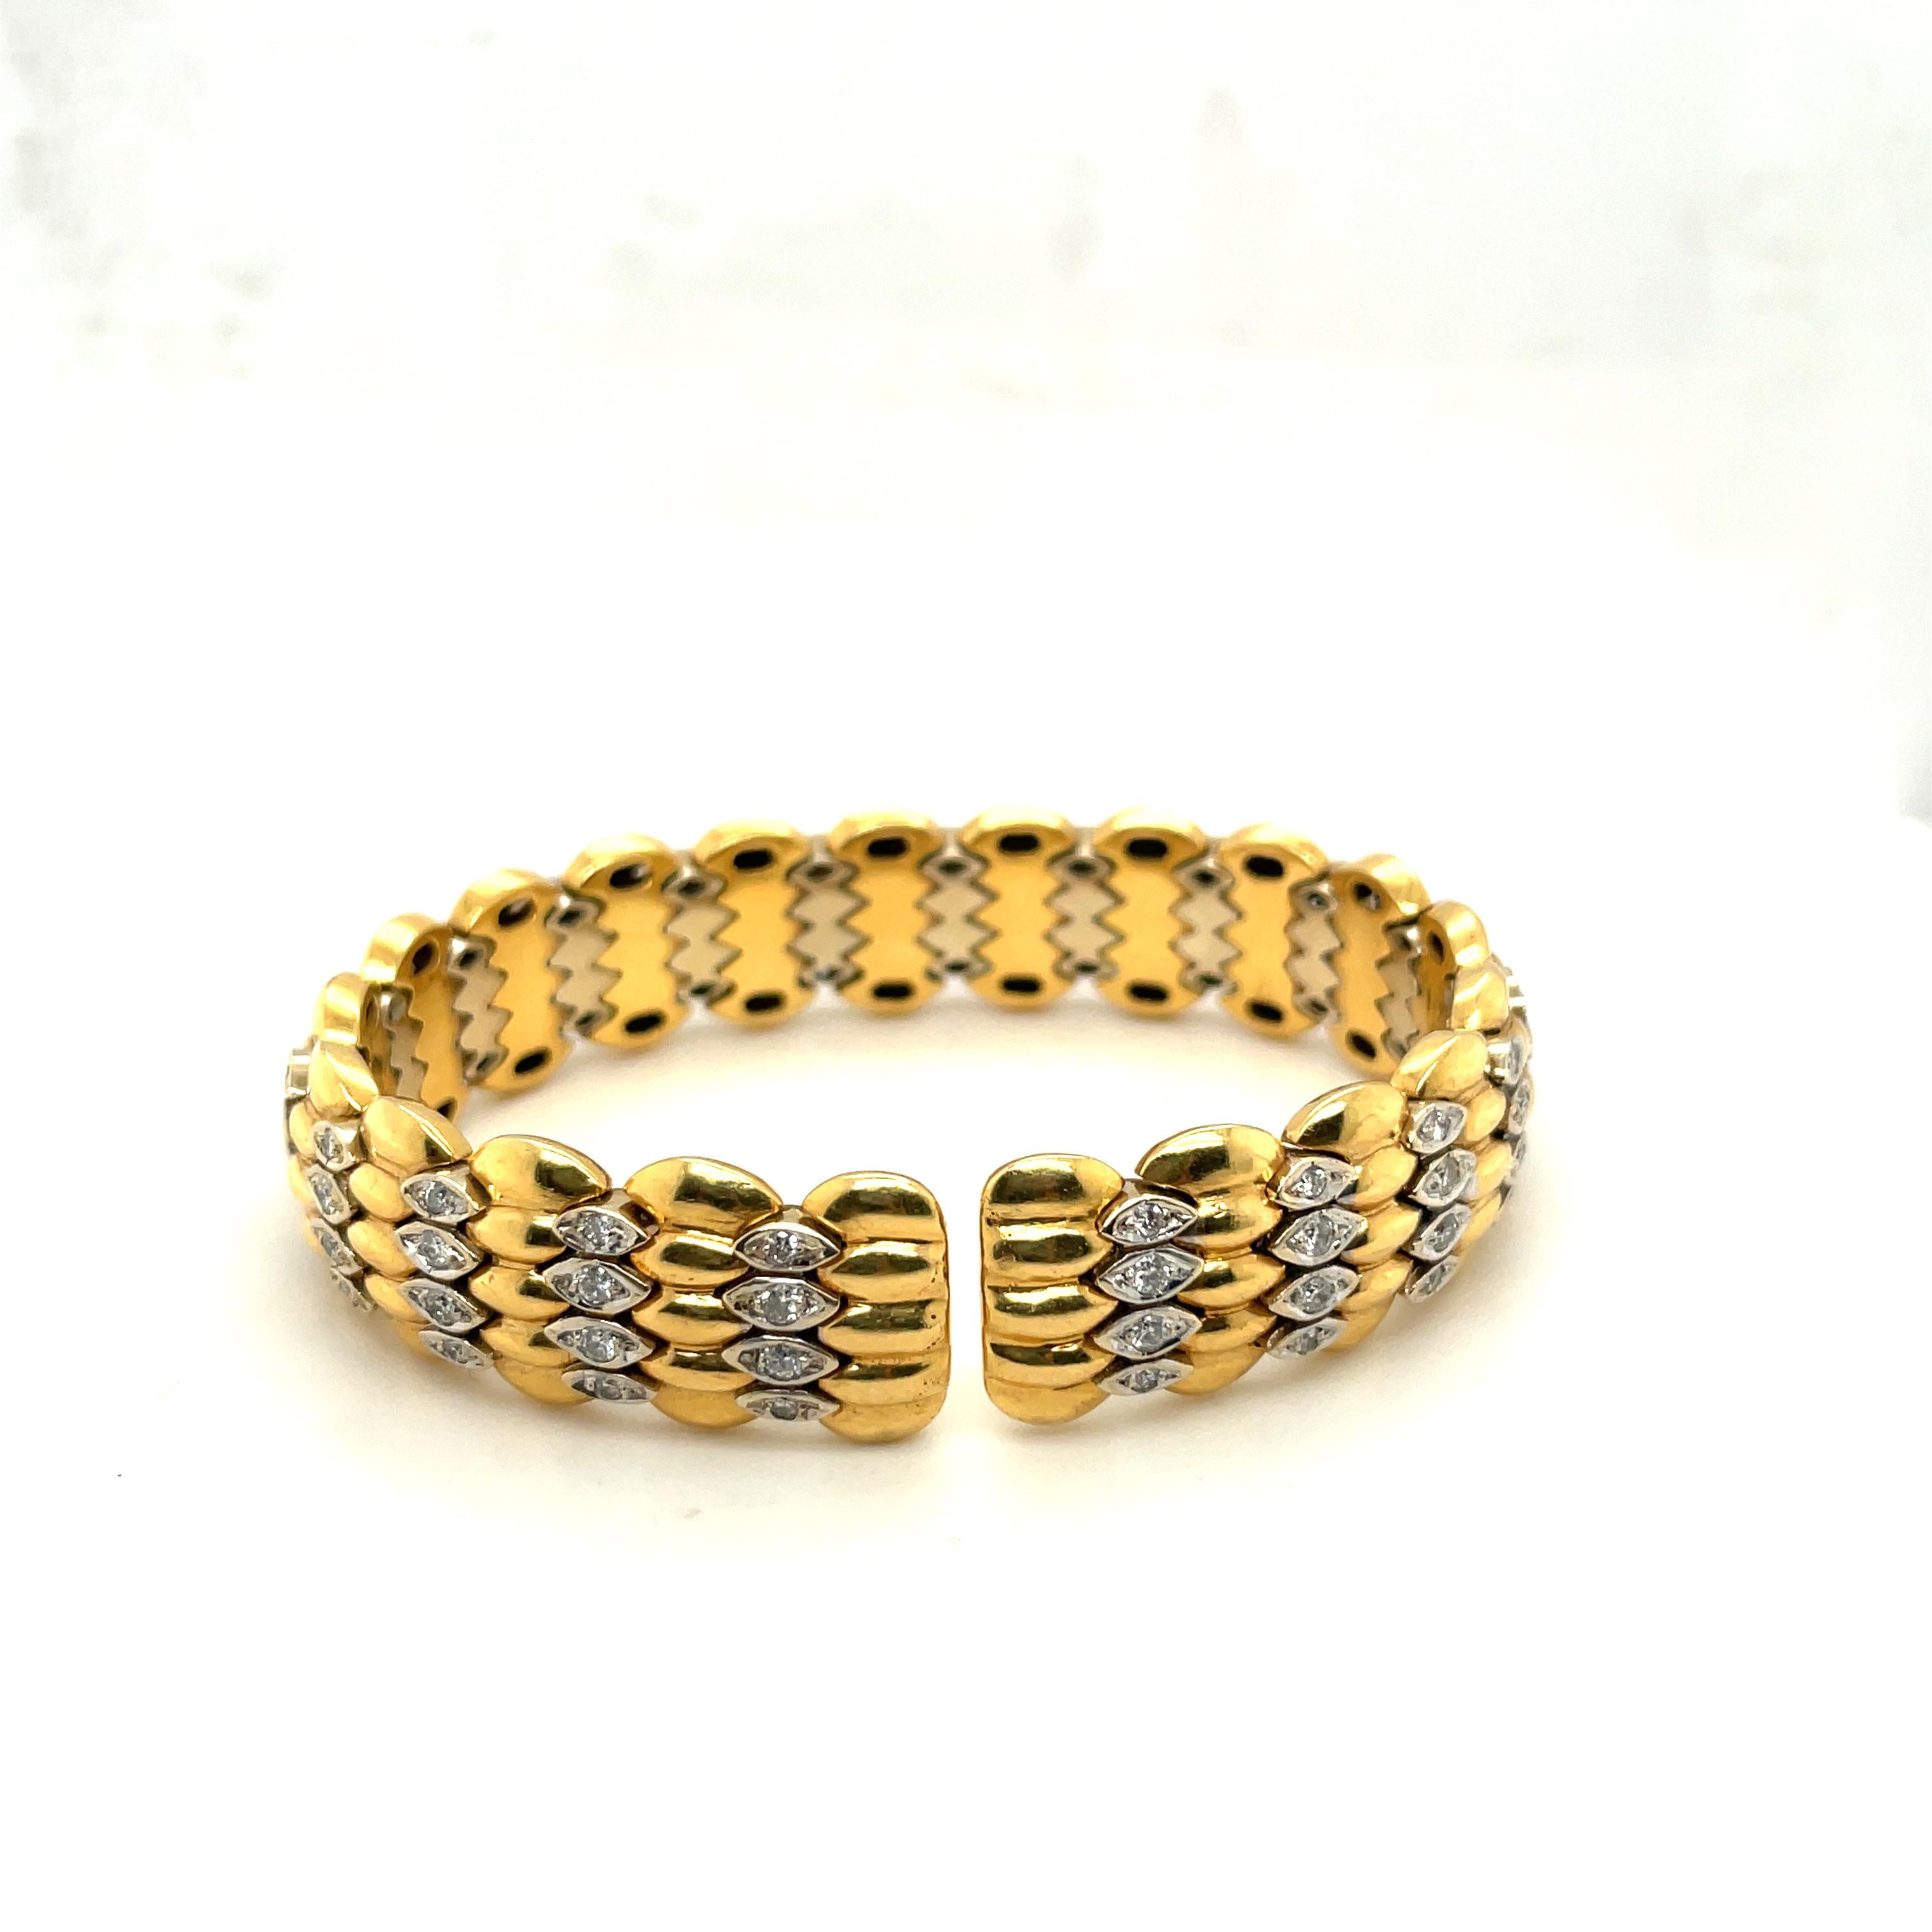 18K Yellow Gold Diamond Cuff Bangle Bracelet In Excellent Condition For Sale In New York, NY